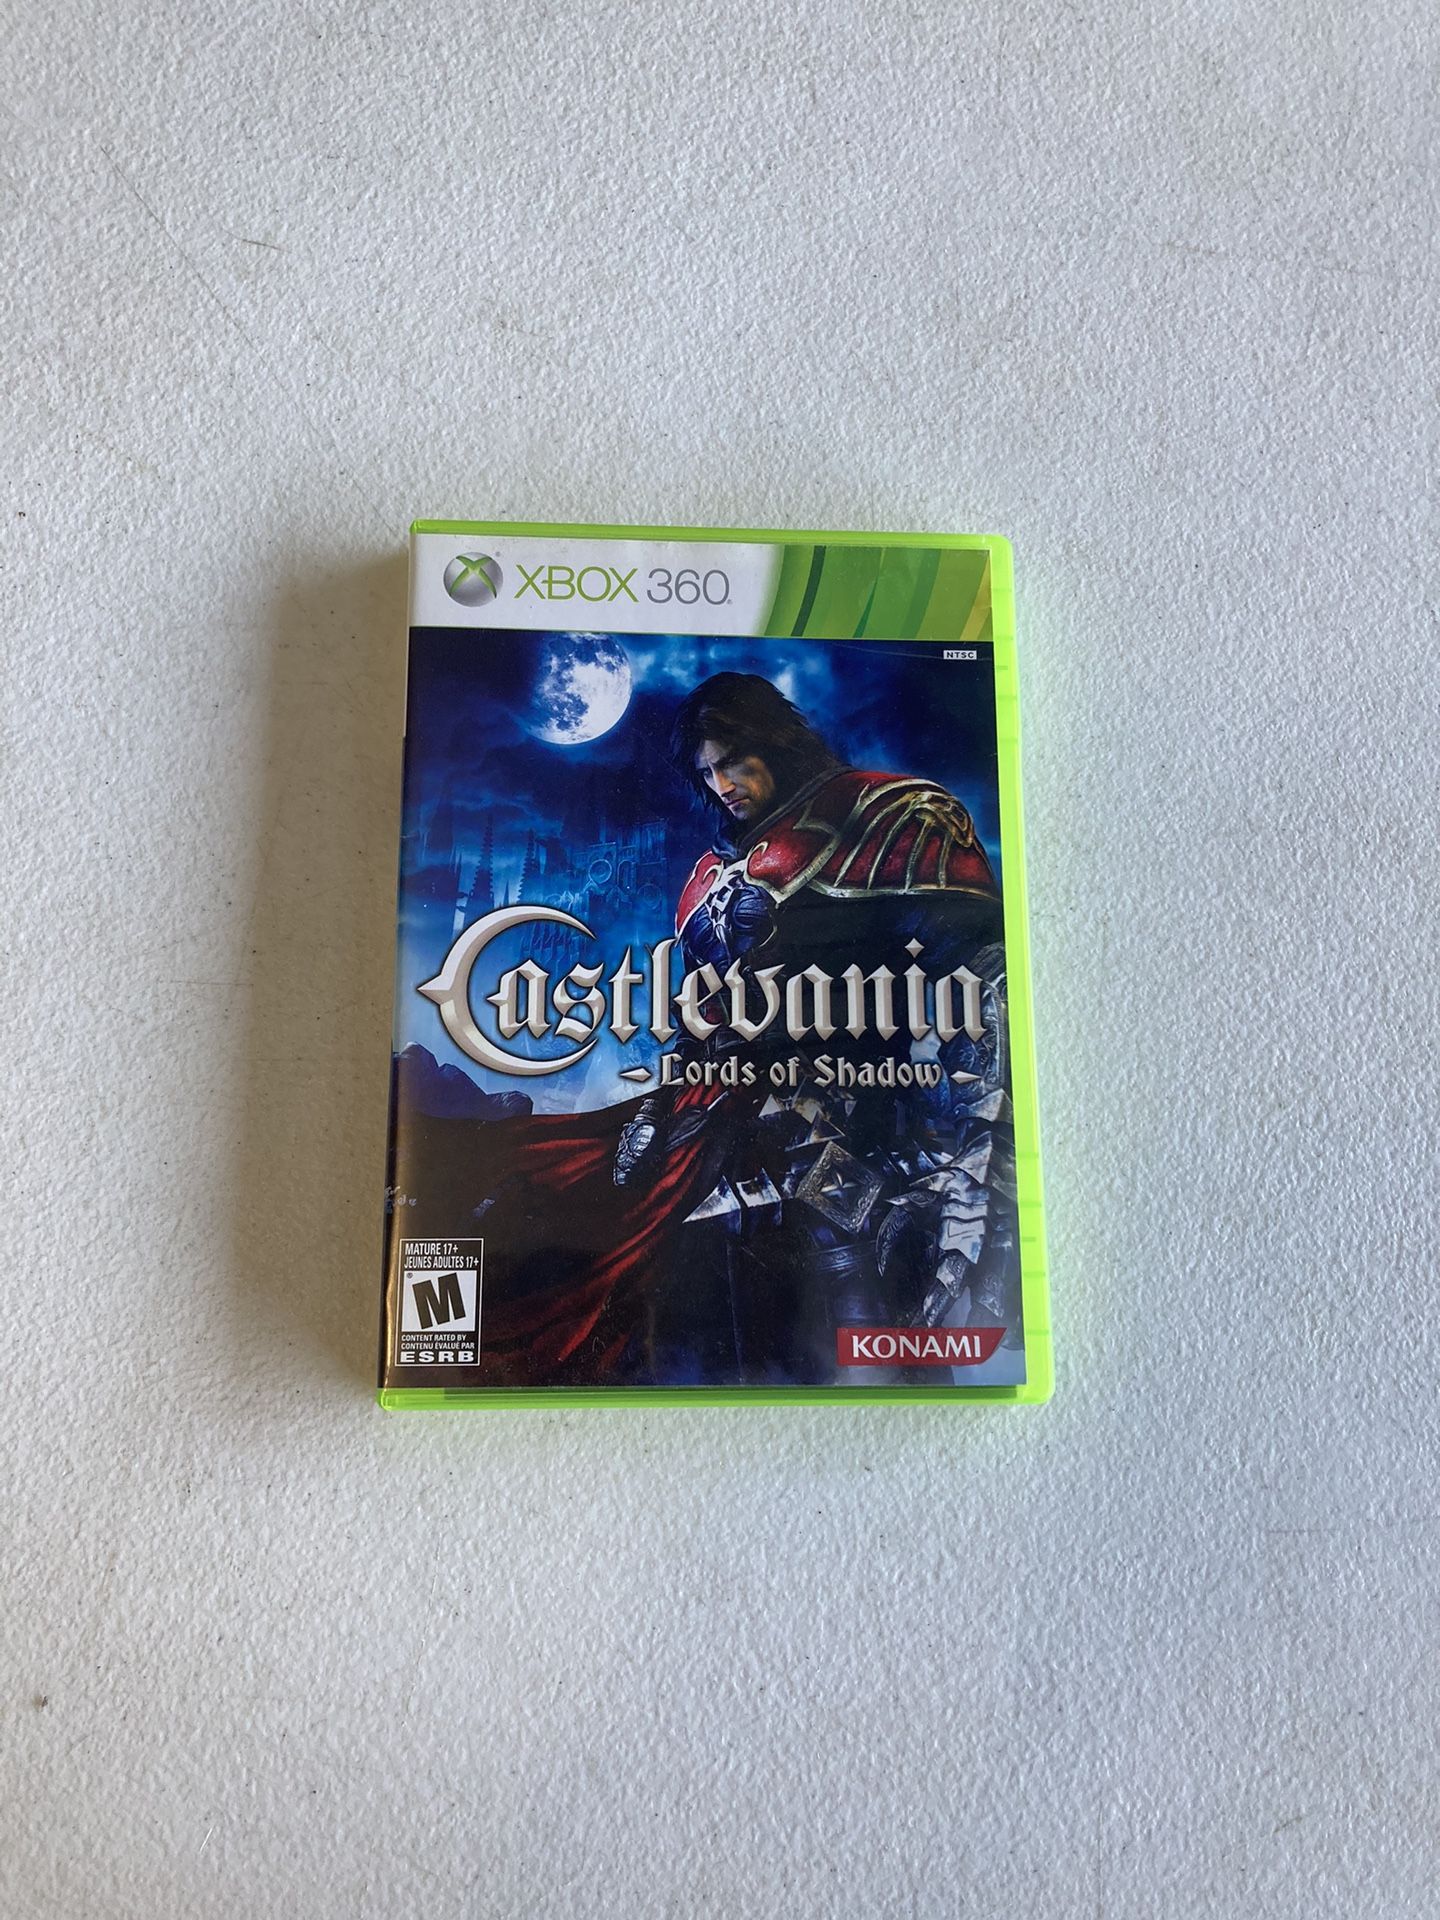 Xbox 360 Castlevania: Lords of Shadow Game 